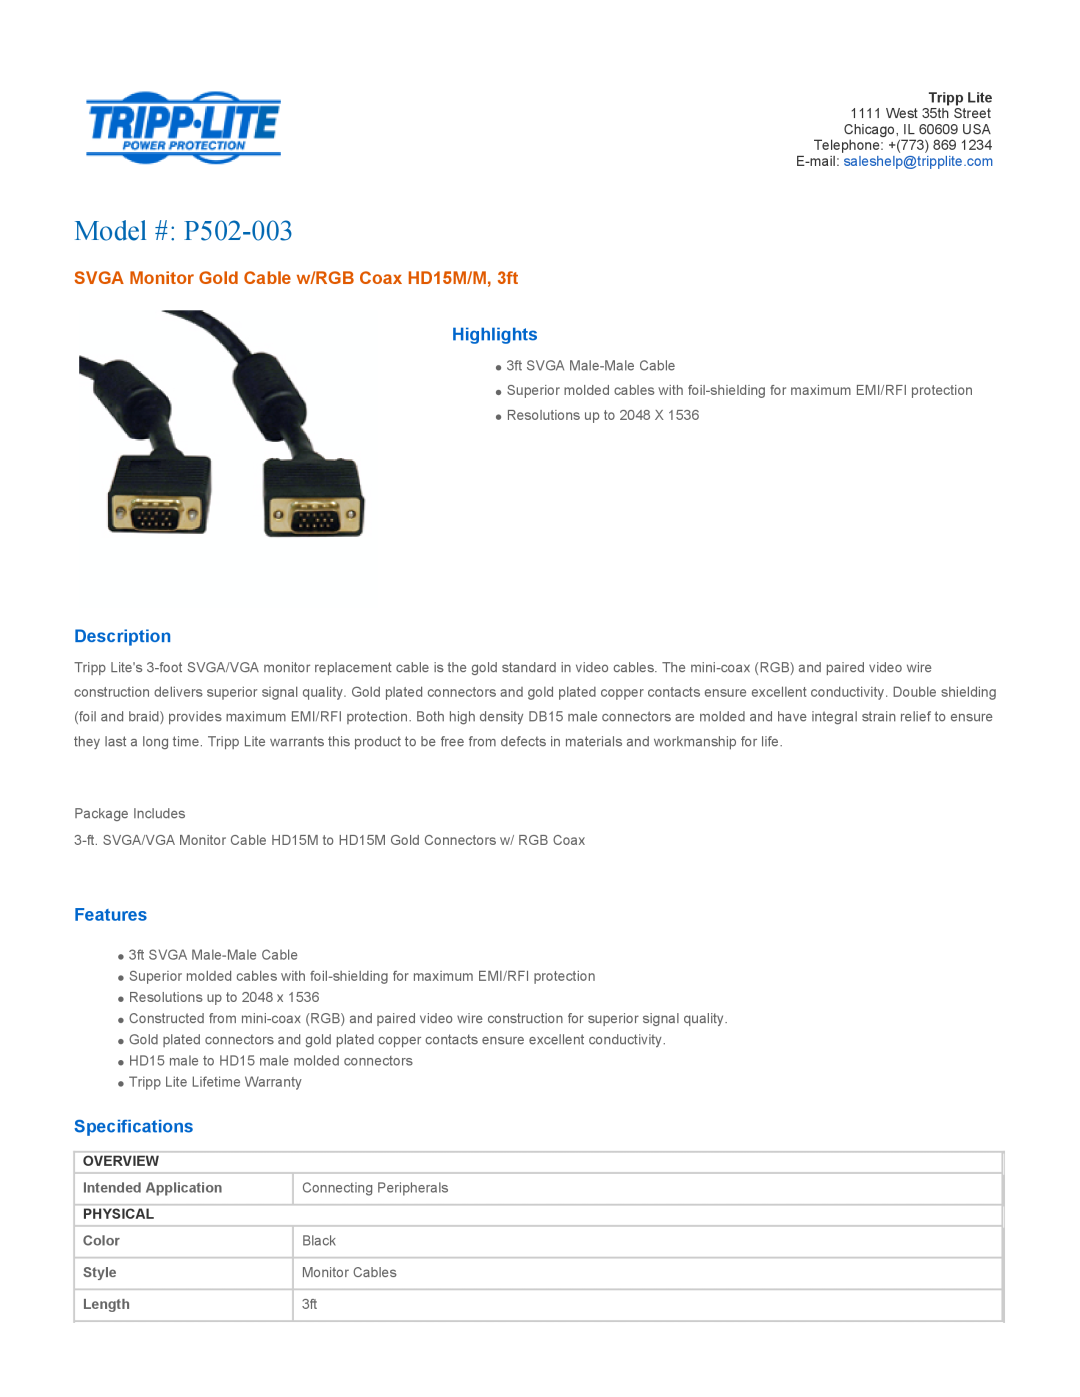 Tripp Lite P502-003 specifications Overview, Intended Application, Connecting Peripherals, Physical, Color, Black, Style 